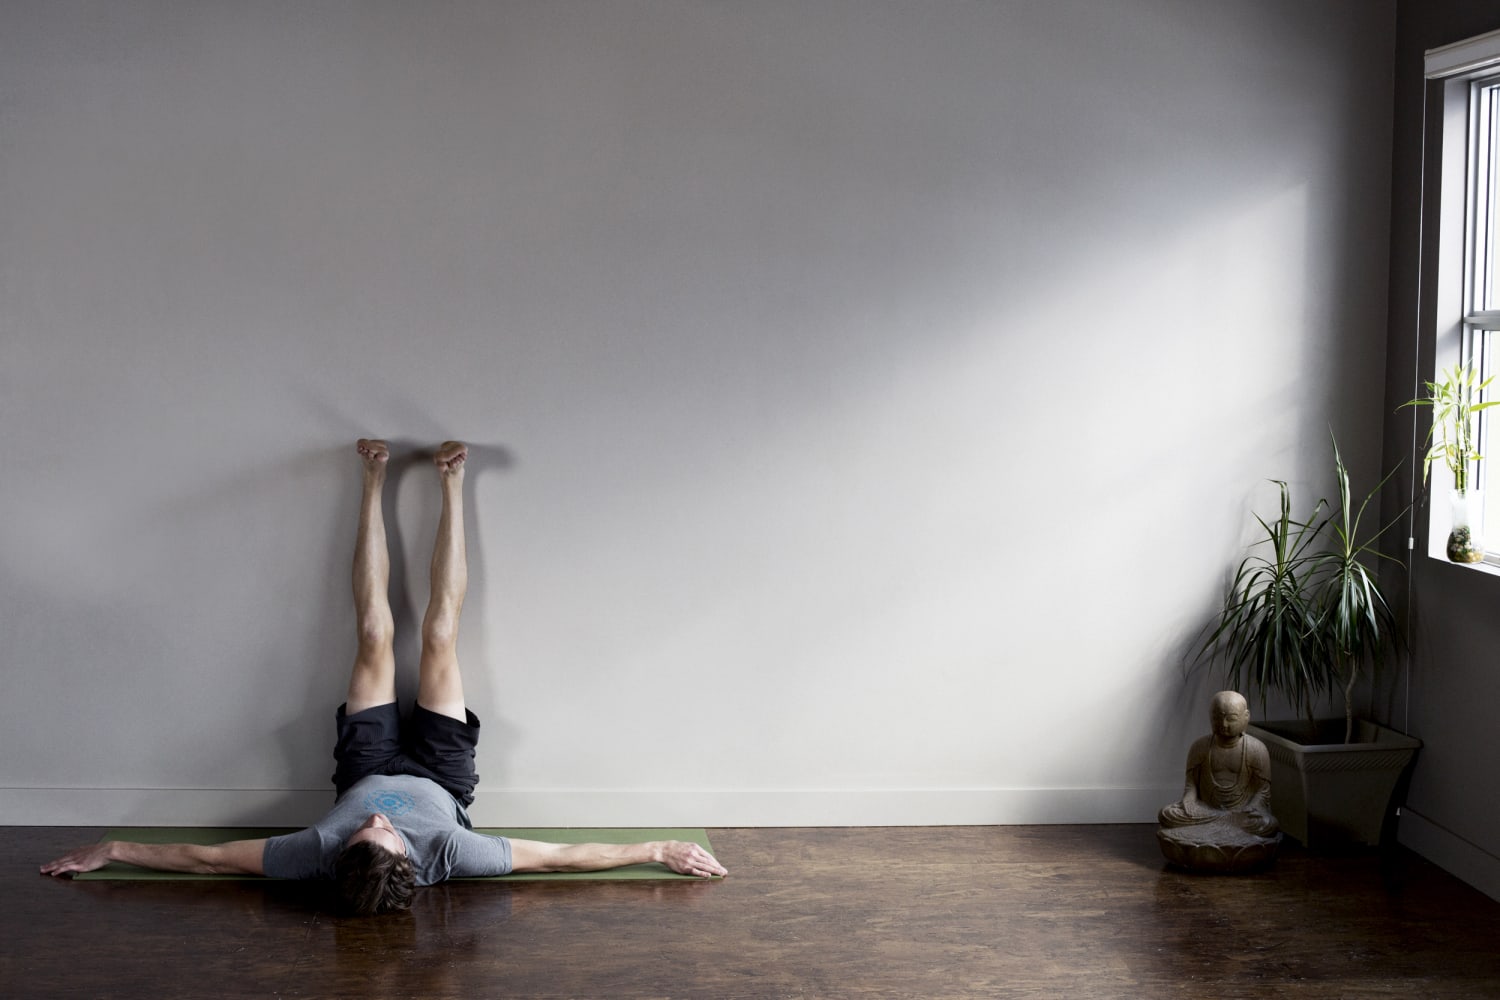 A 10-Minute Morning Yoga Practice to Jump-Start Your Day